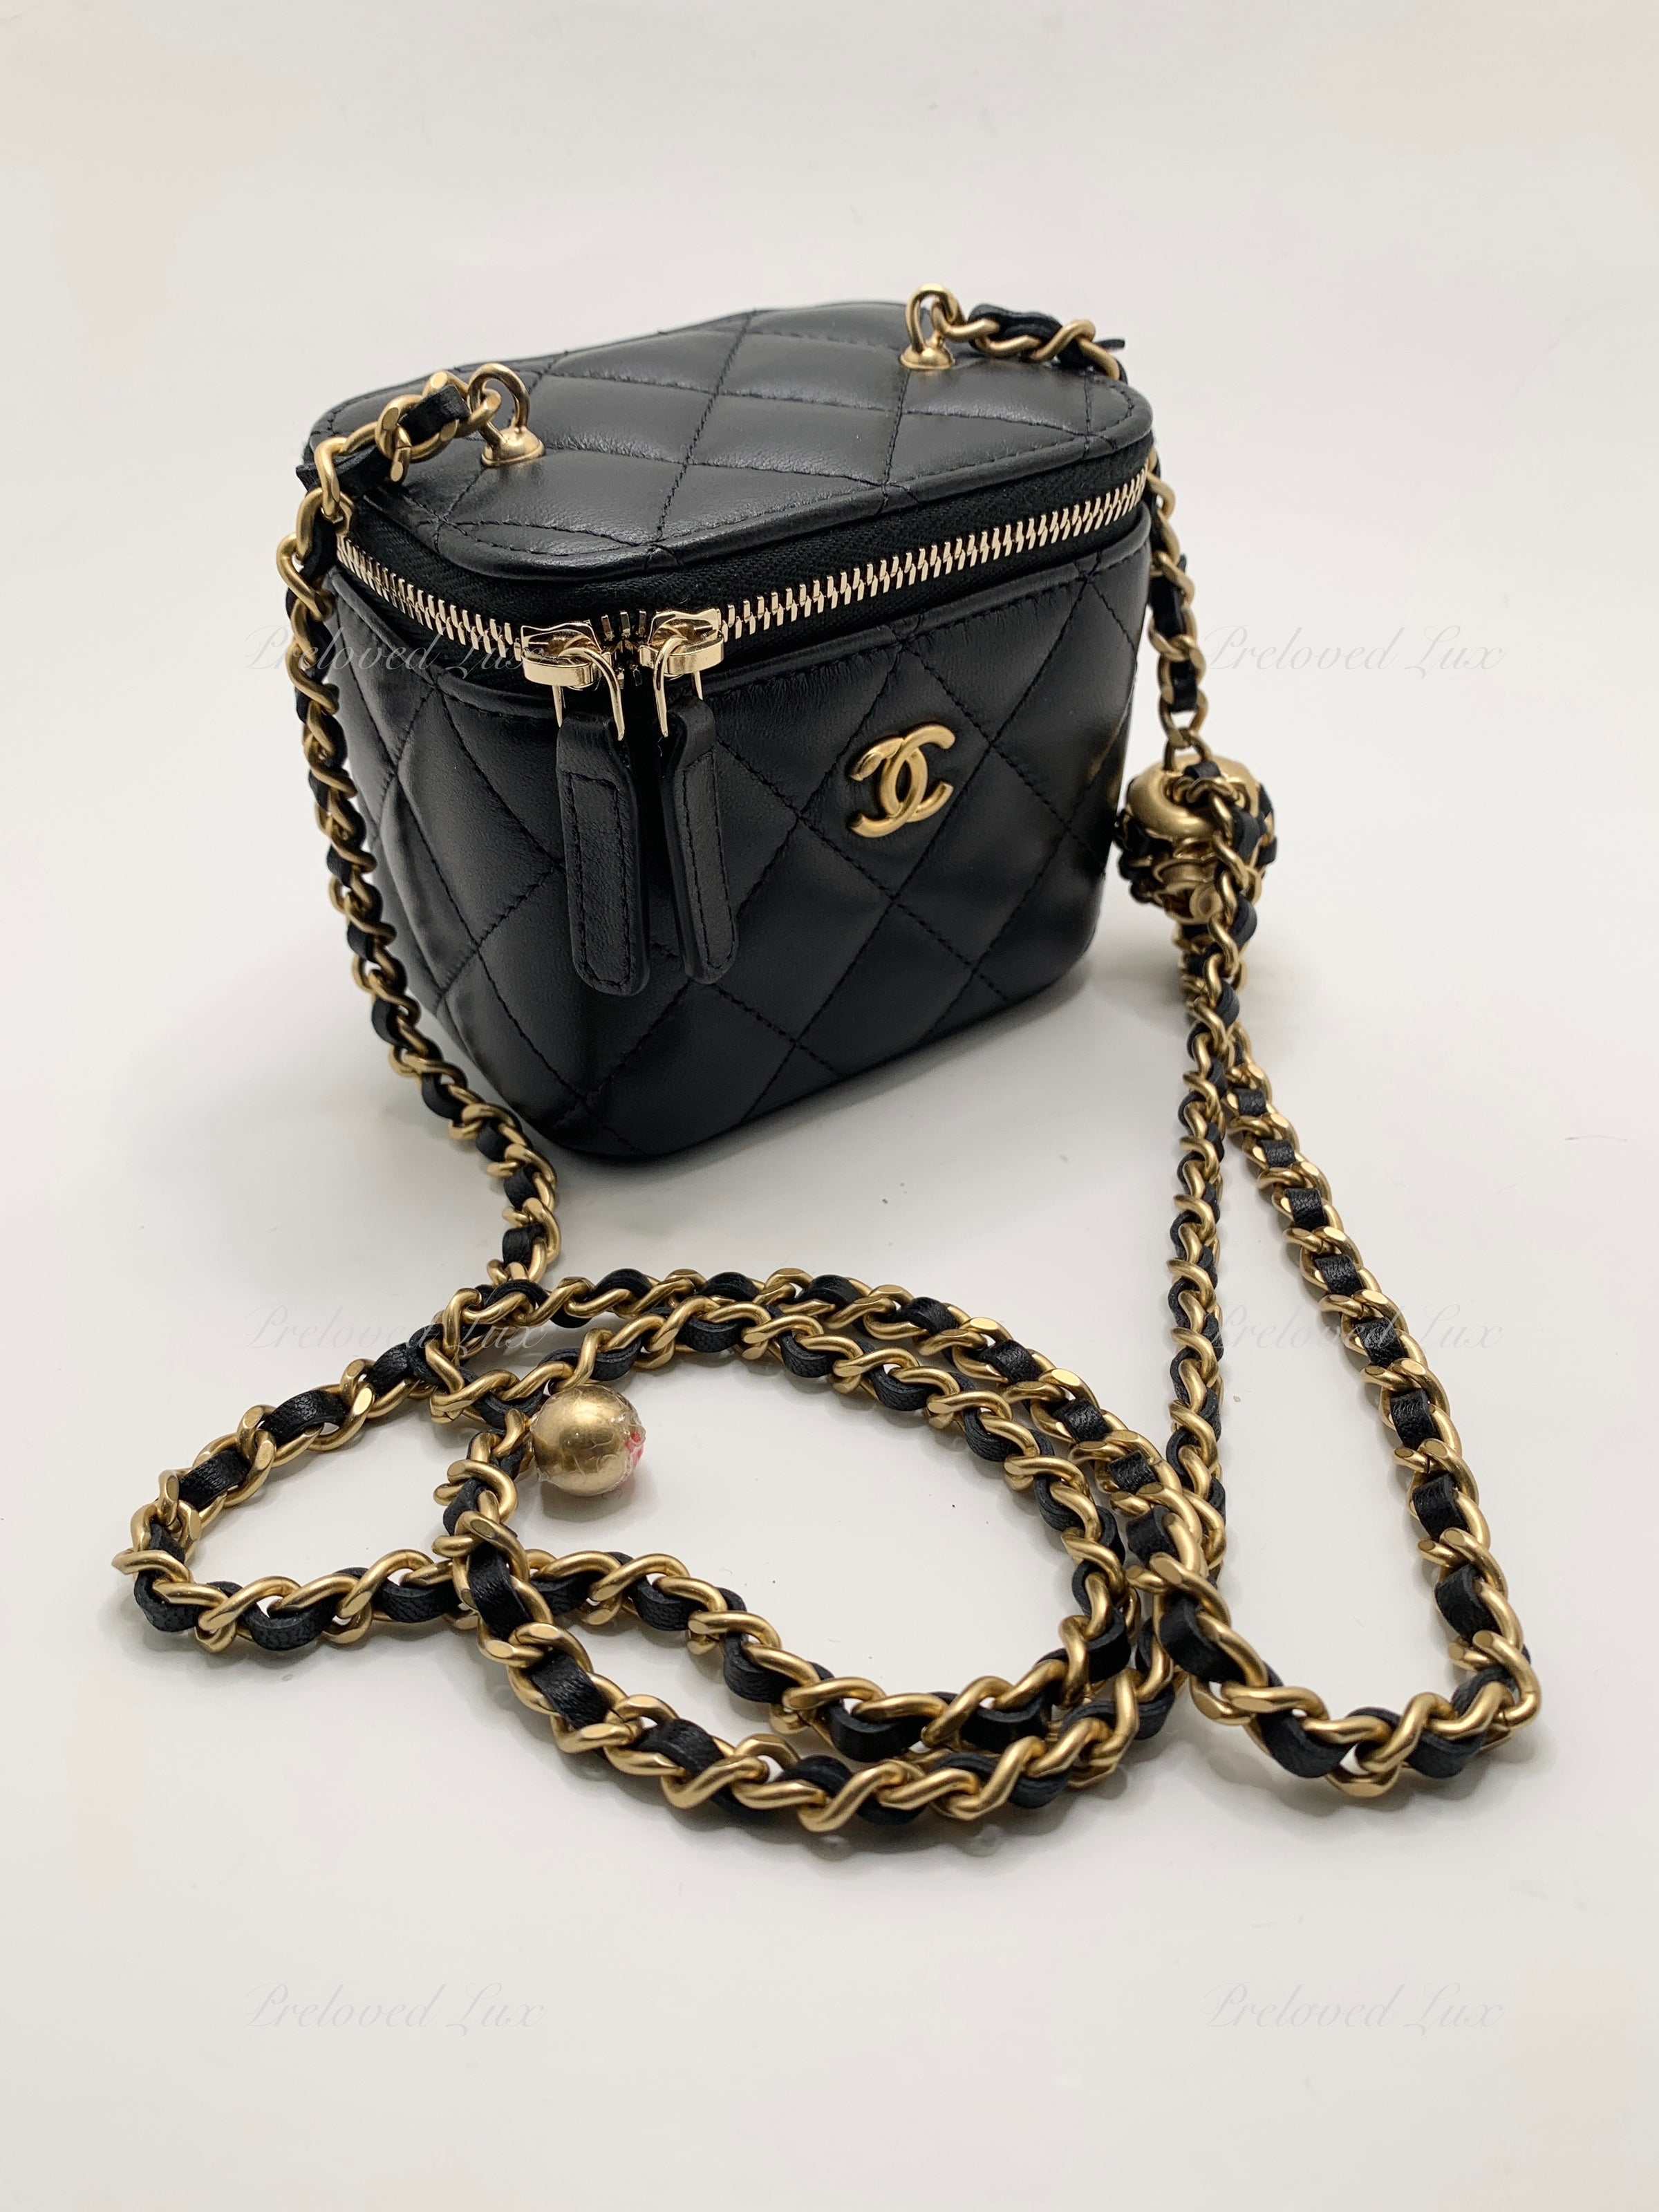 Chanel  Box Clutch on Chain  Black Patent  CGHW  Mint  Bagista